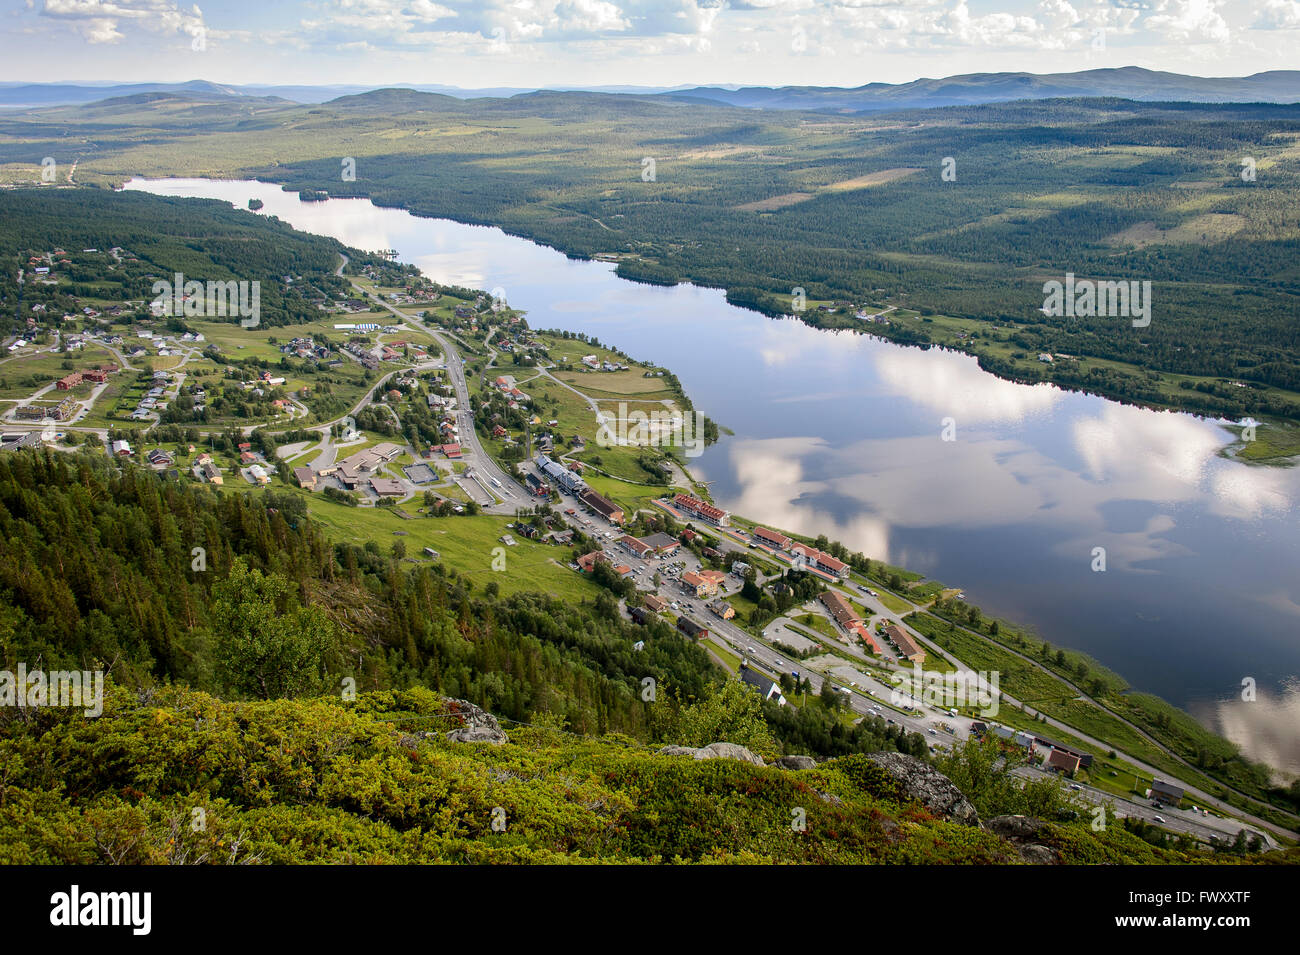 Sweden, Jamtland, Funasdalen, Elevated view of river and town Stock Photo